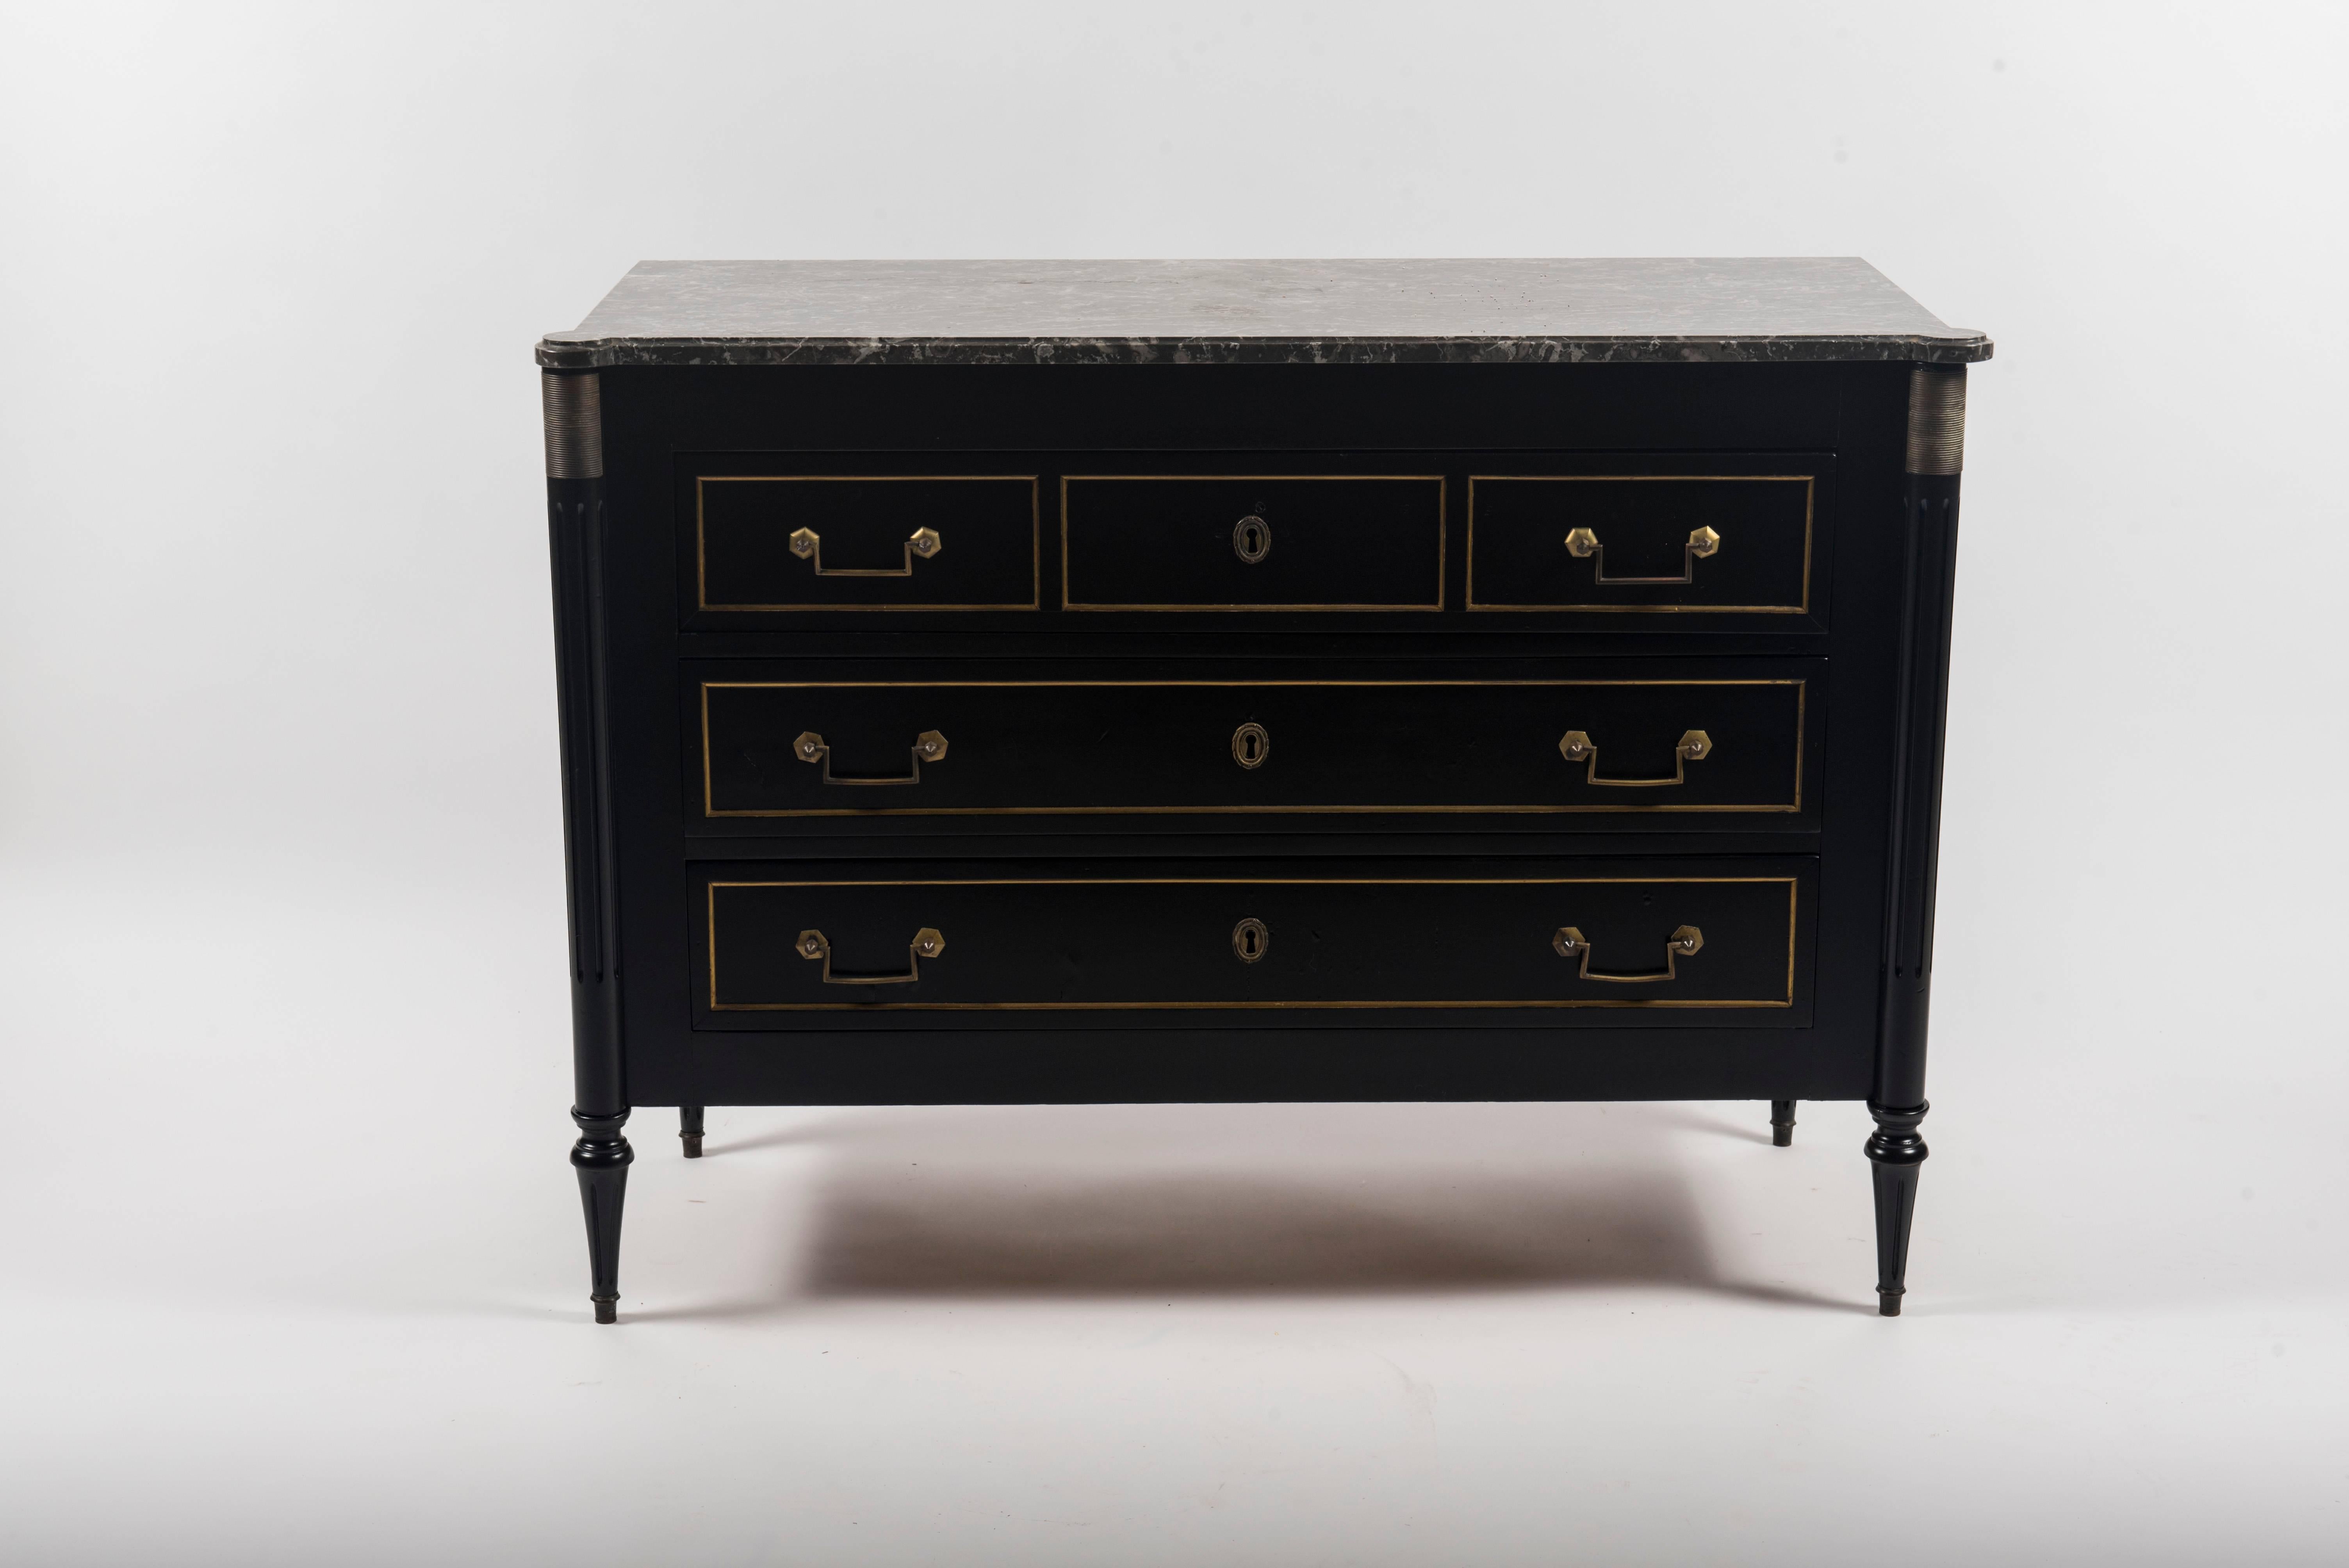 A 1940s, French Maison Jansen style ebonized chest of drawers with bronze handles, trim accents and charcoal gray black marble top.